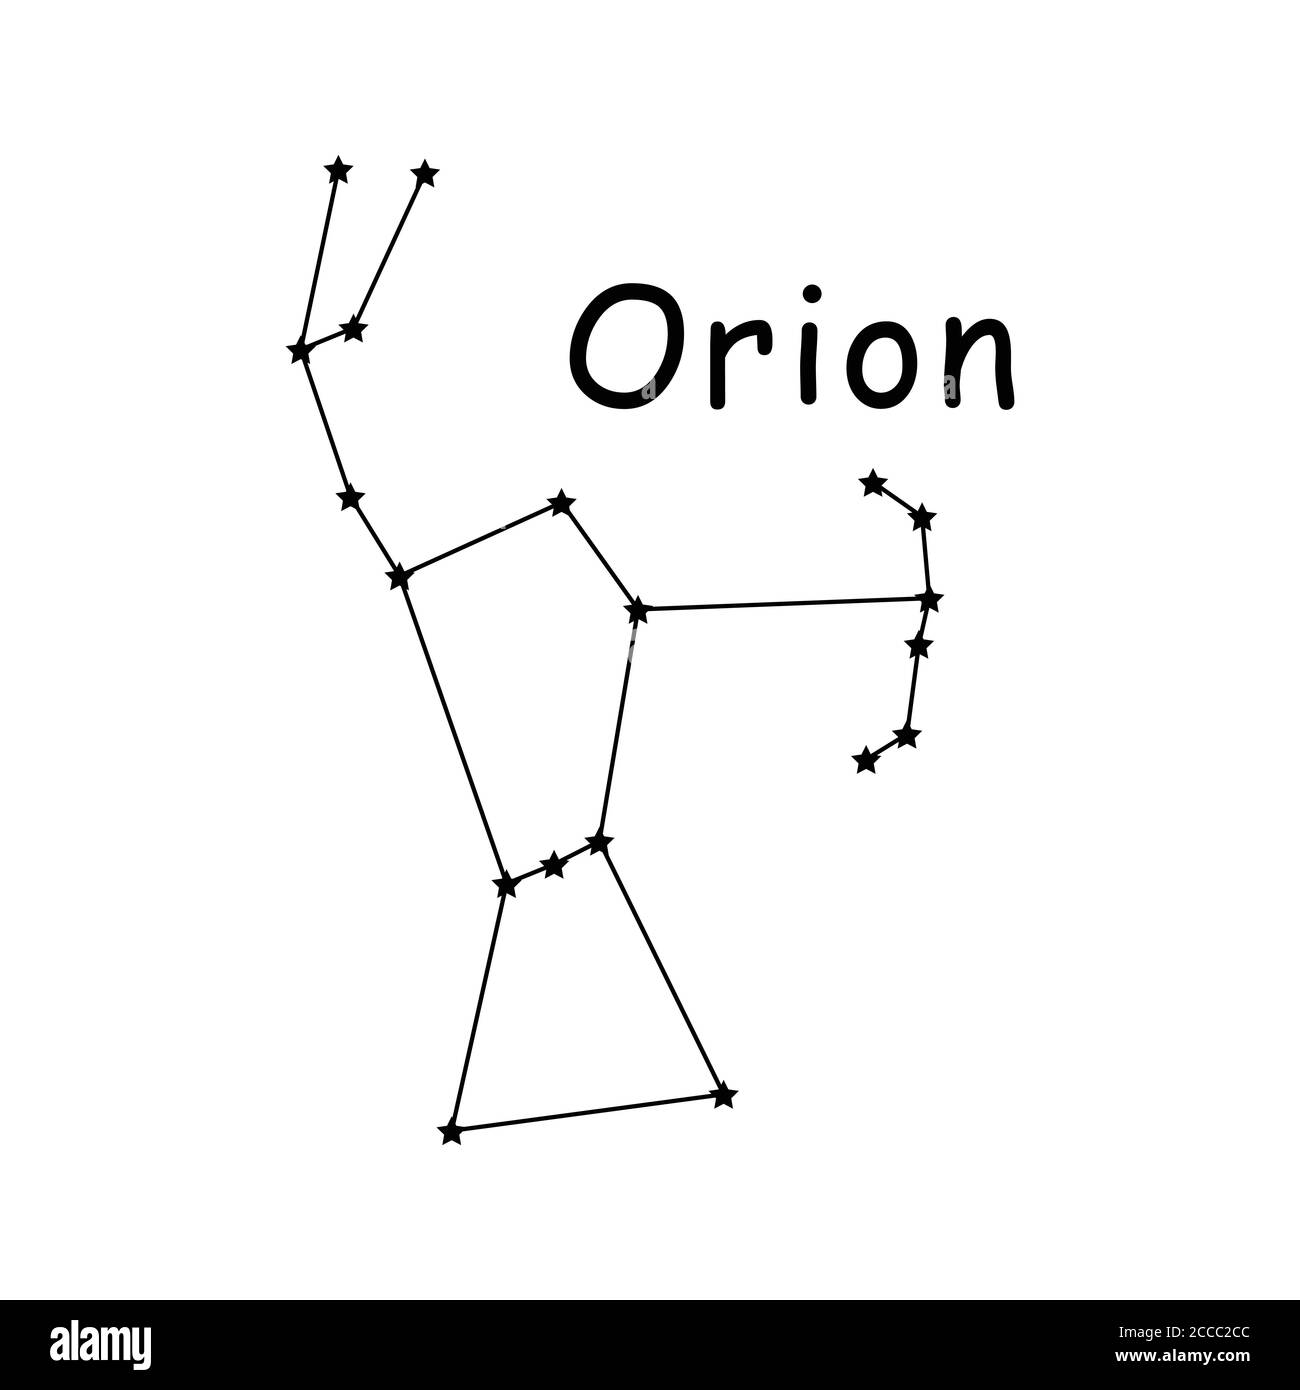 Image of Orion Constellation - Constellation of Orion - Orion Constellation  extracted